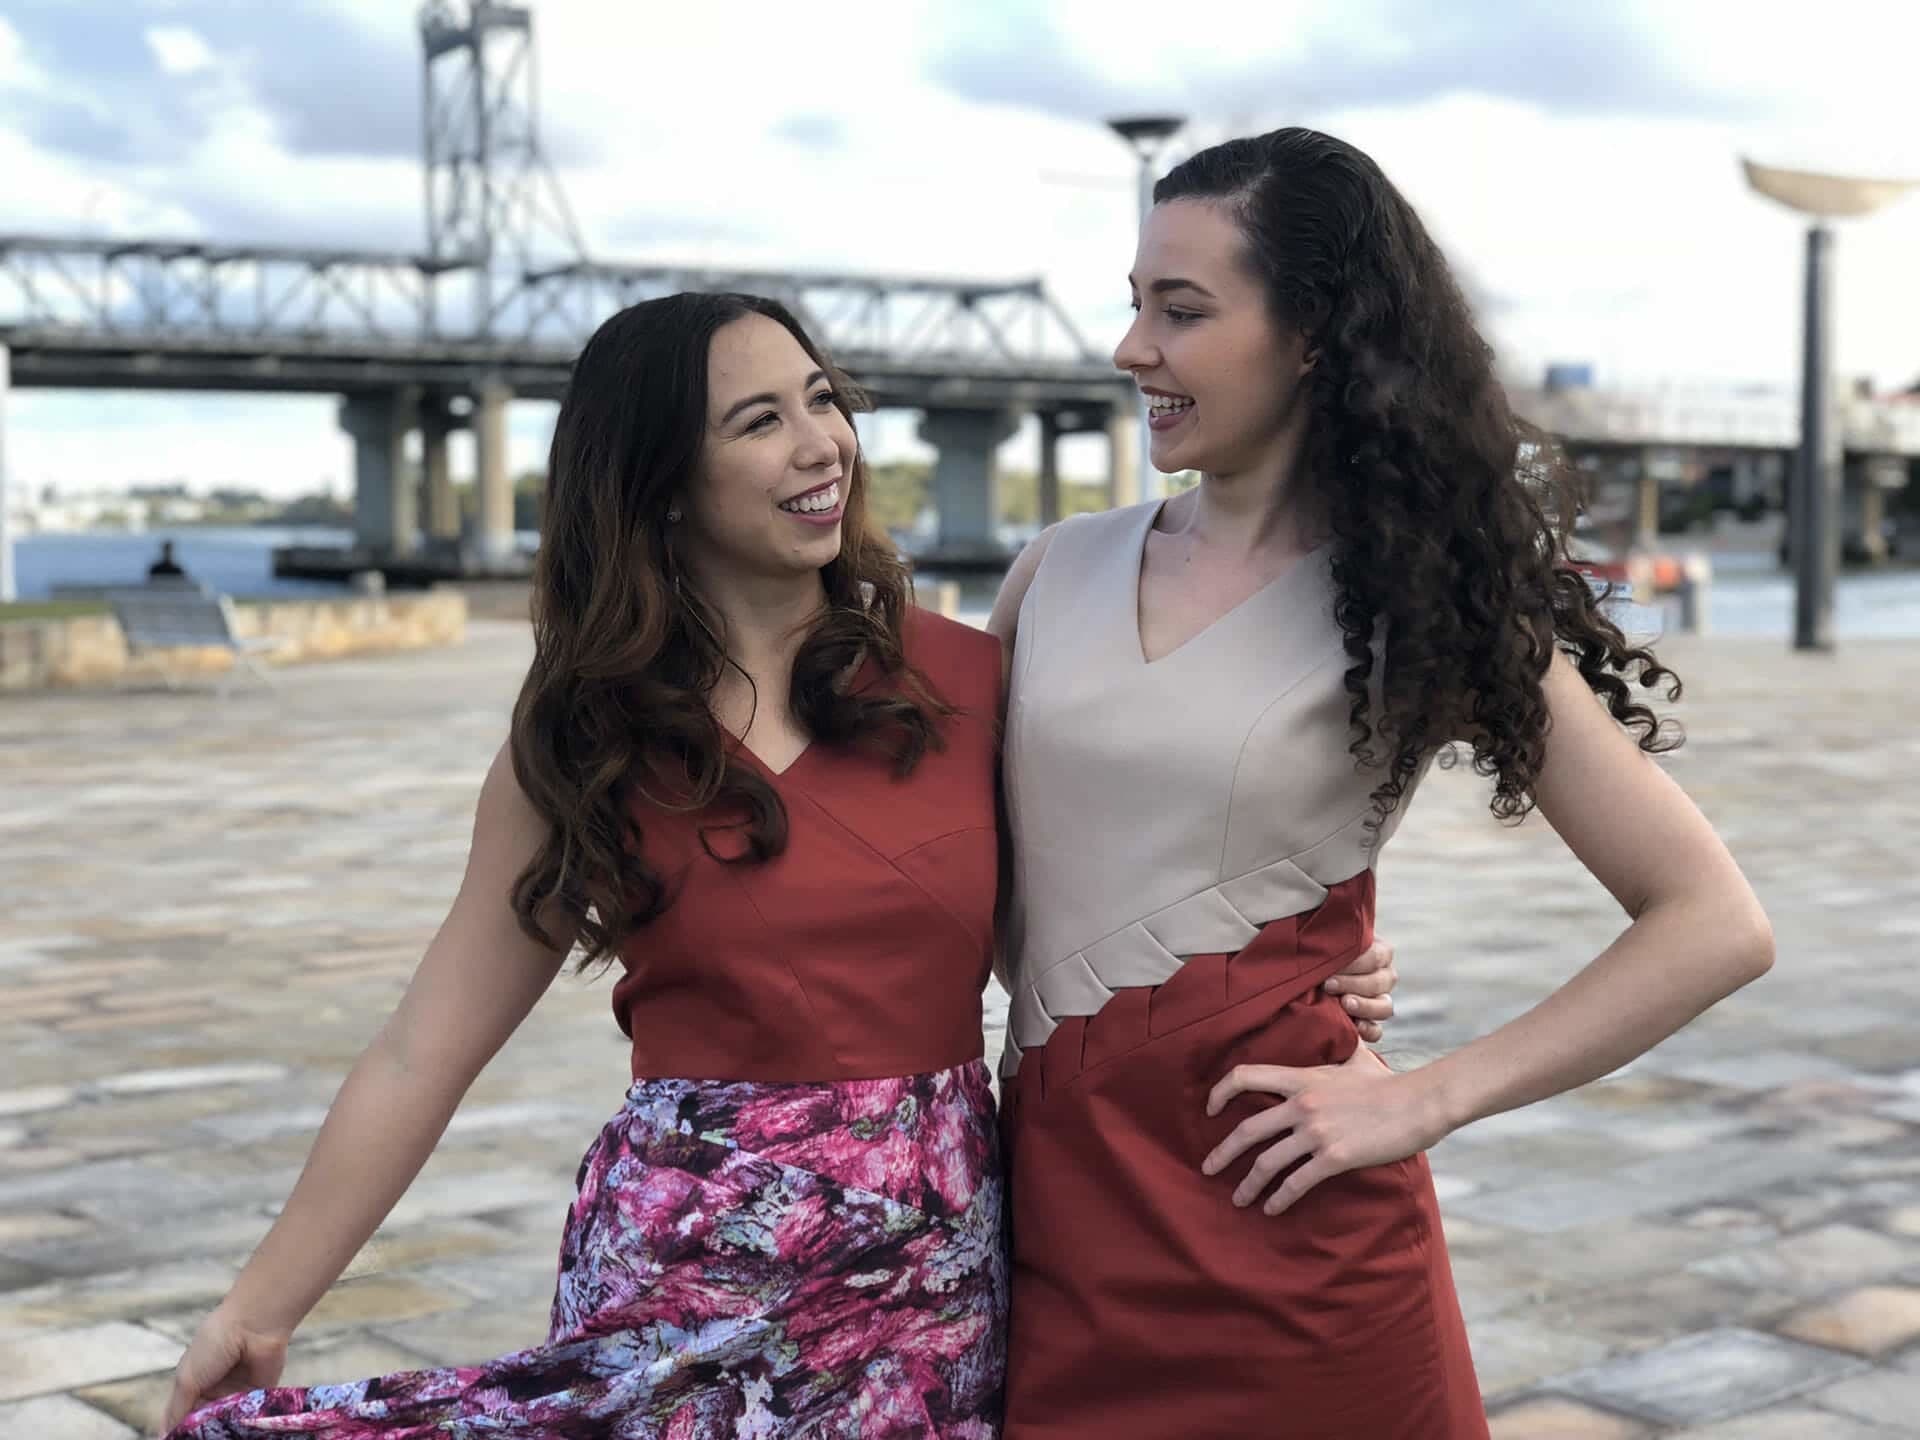 Two women looking stylish and standing arm in arm